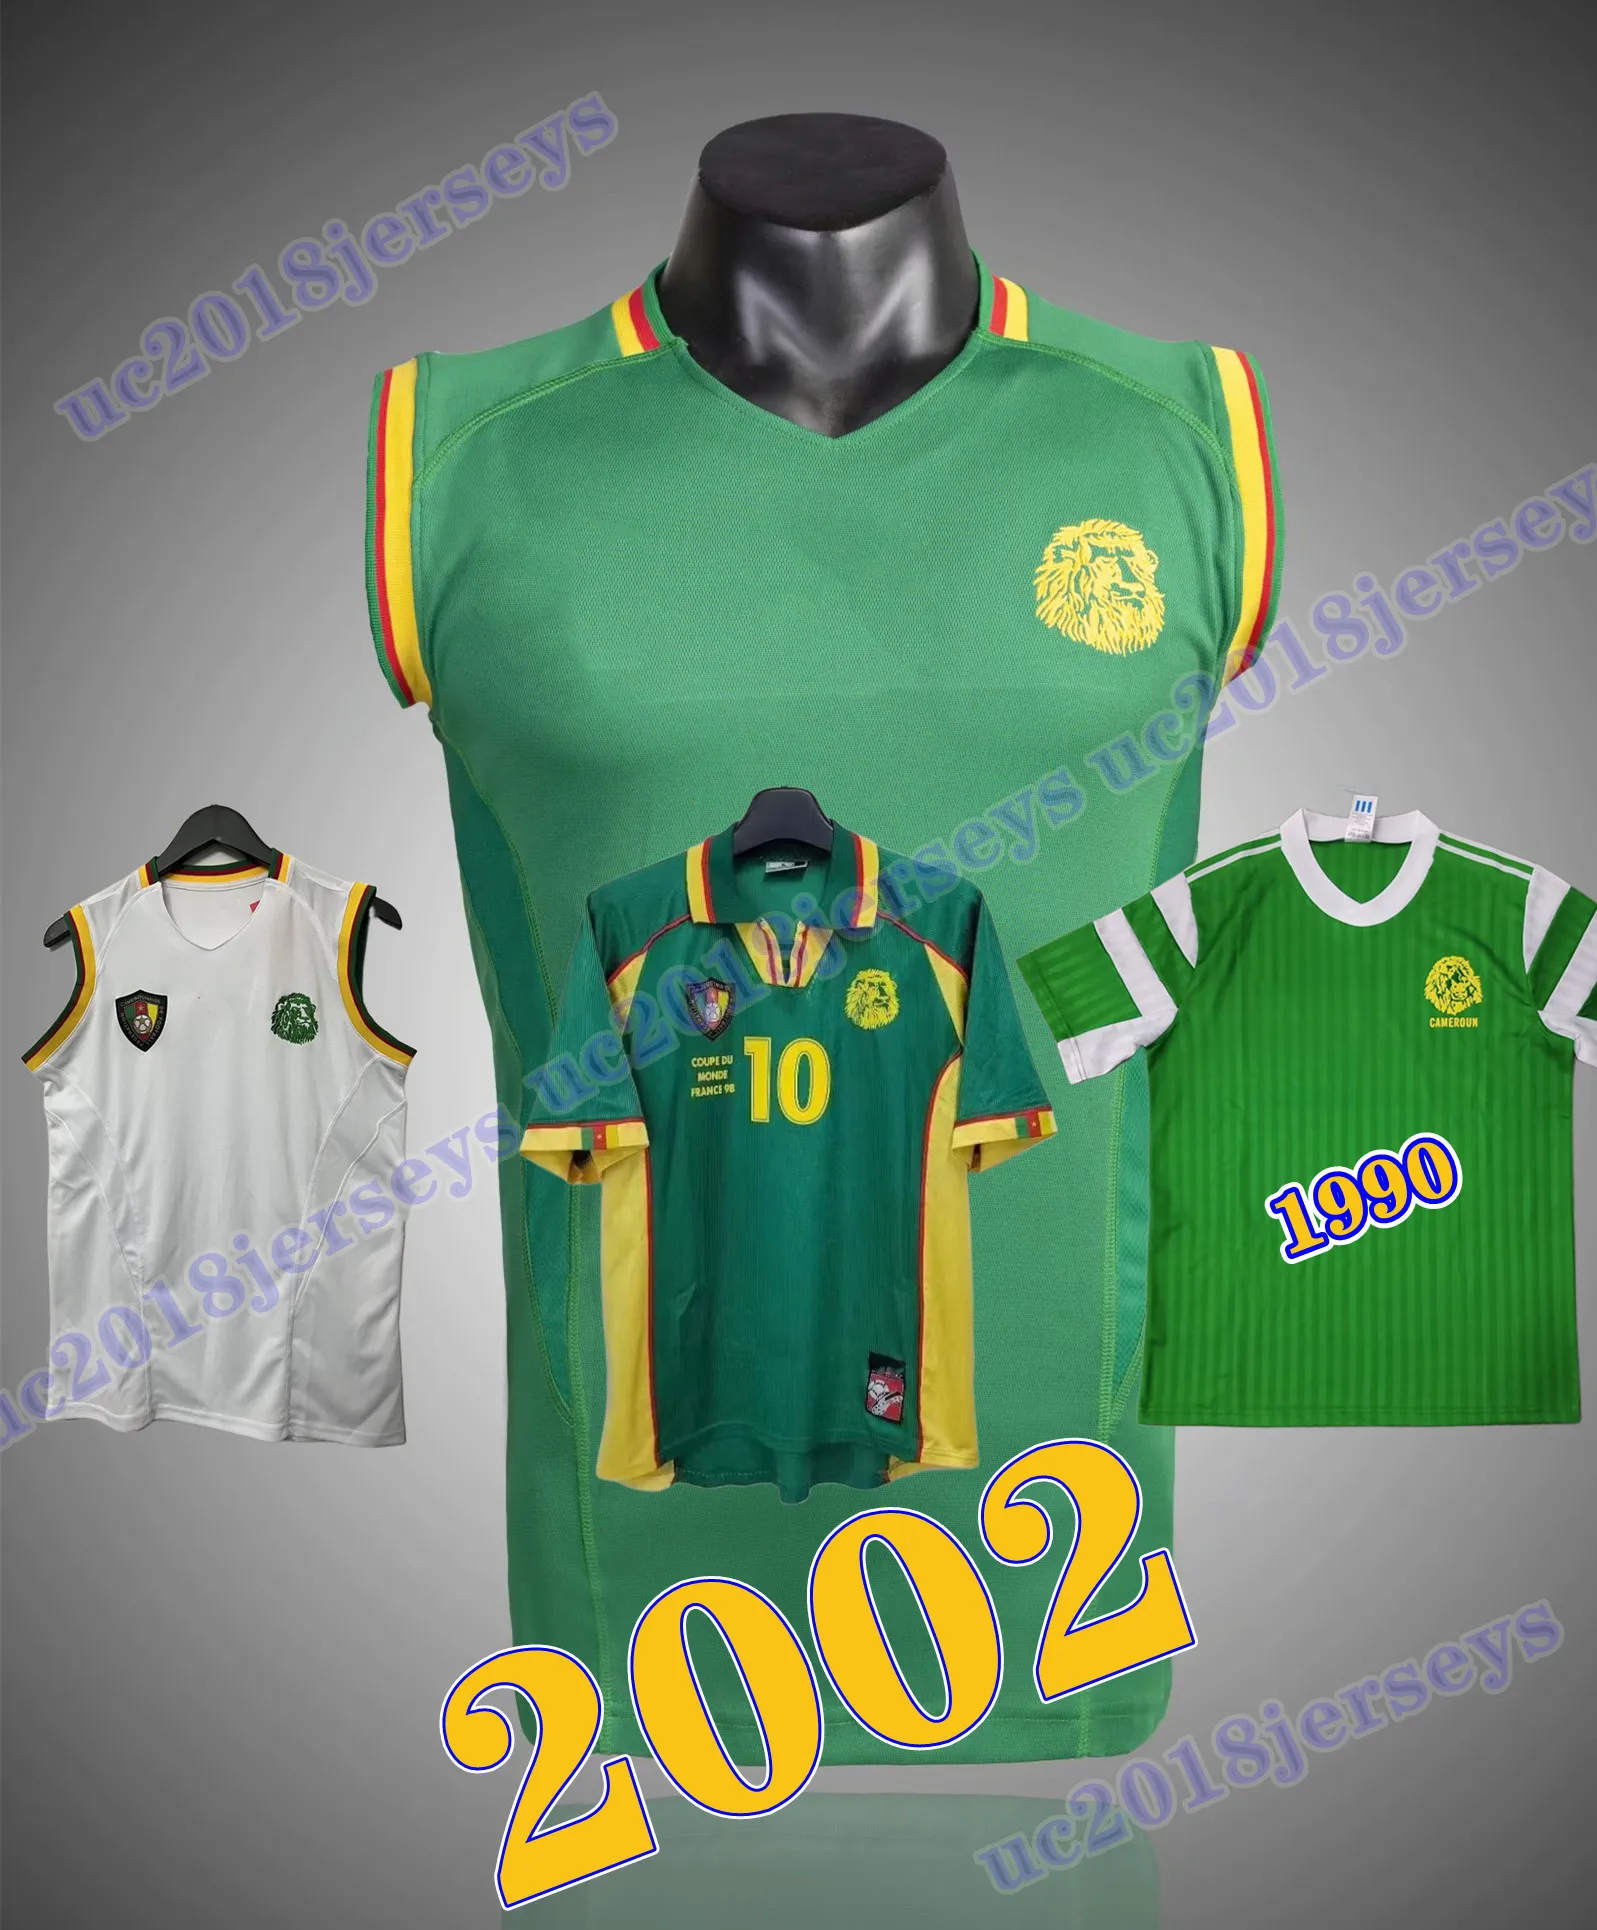 1990 1998 2002 Maillots de football Cameroun Chemise à domicile Maillot rétro Eto'o Geremi Wome Song Djemba-Djemba 90 98 02 Chemises de football classiques haut